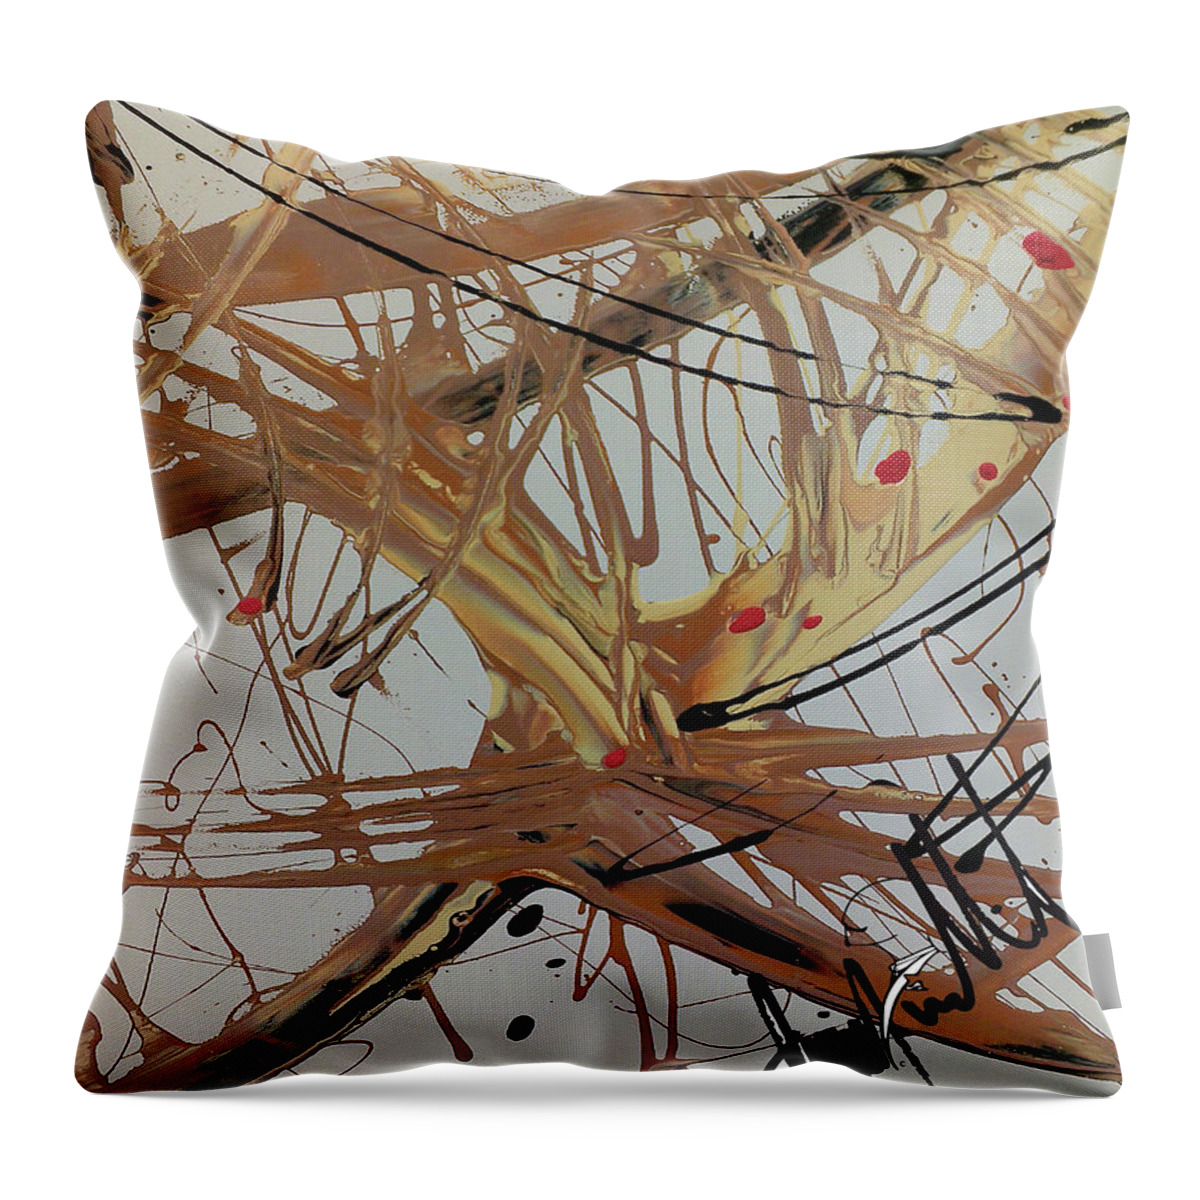  Throw Pillow featuring the digital art Ping by Jimmy Williams